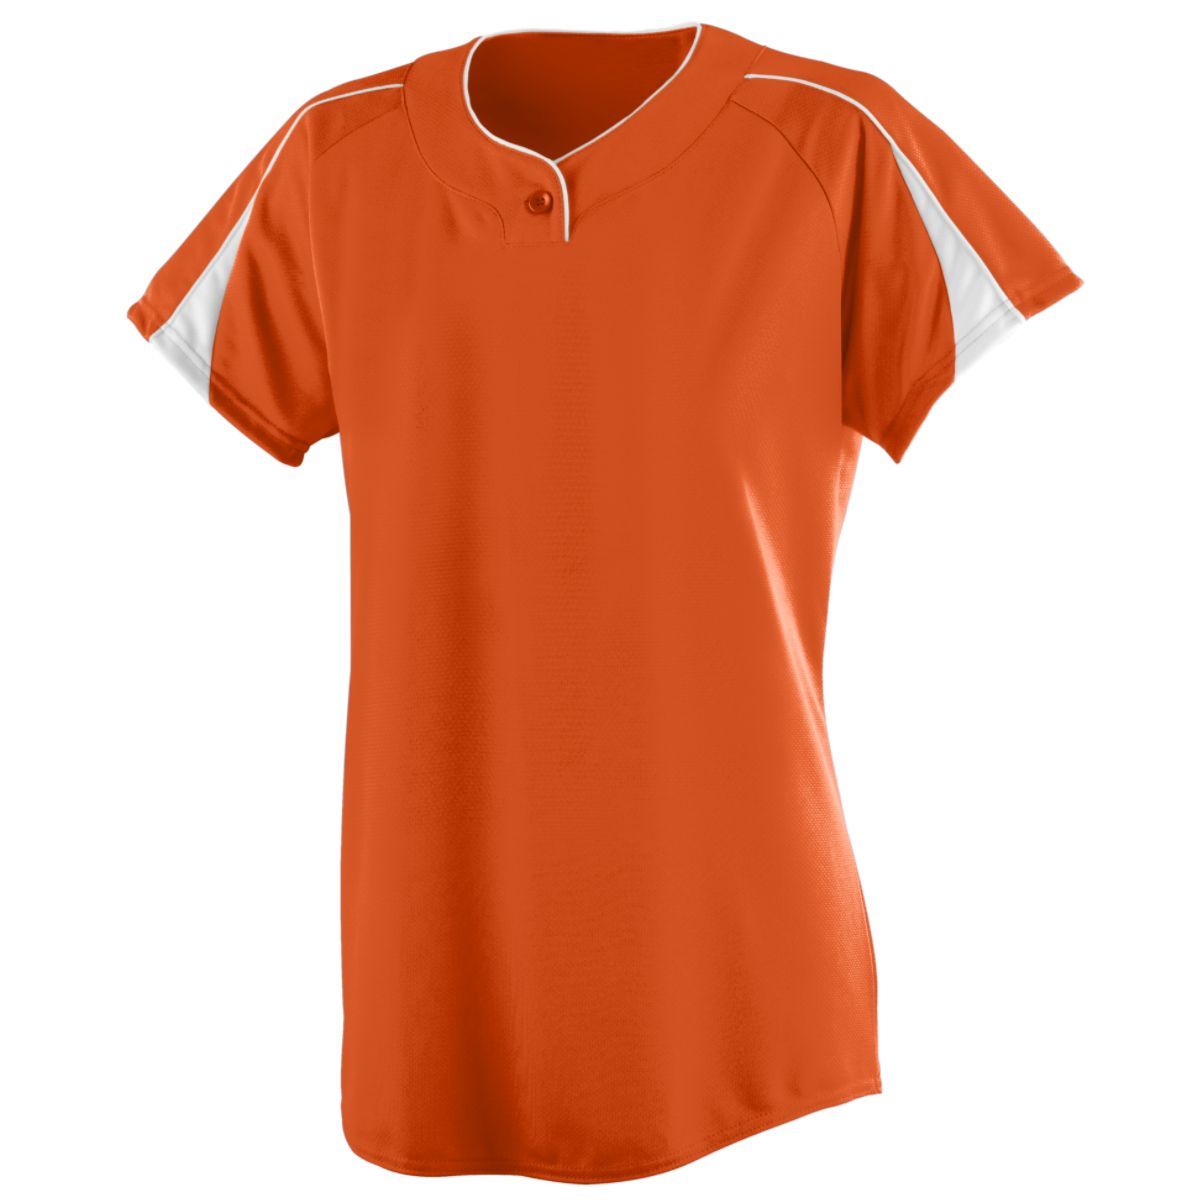 Augusta Sportswear Ladies Diamond Jersey in Orange/White  -Part of the Ladies, Ladies-Jersey, Augusta-Products, Softball, Shirts product lines at KanaleyCreations.com